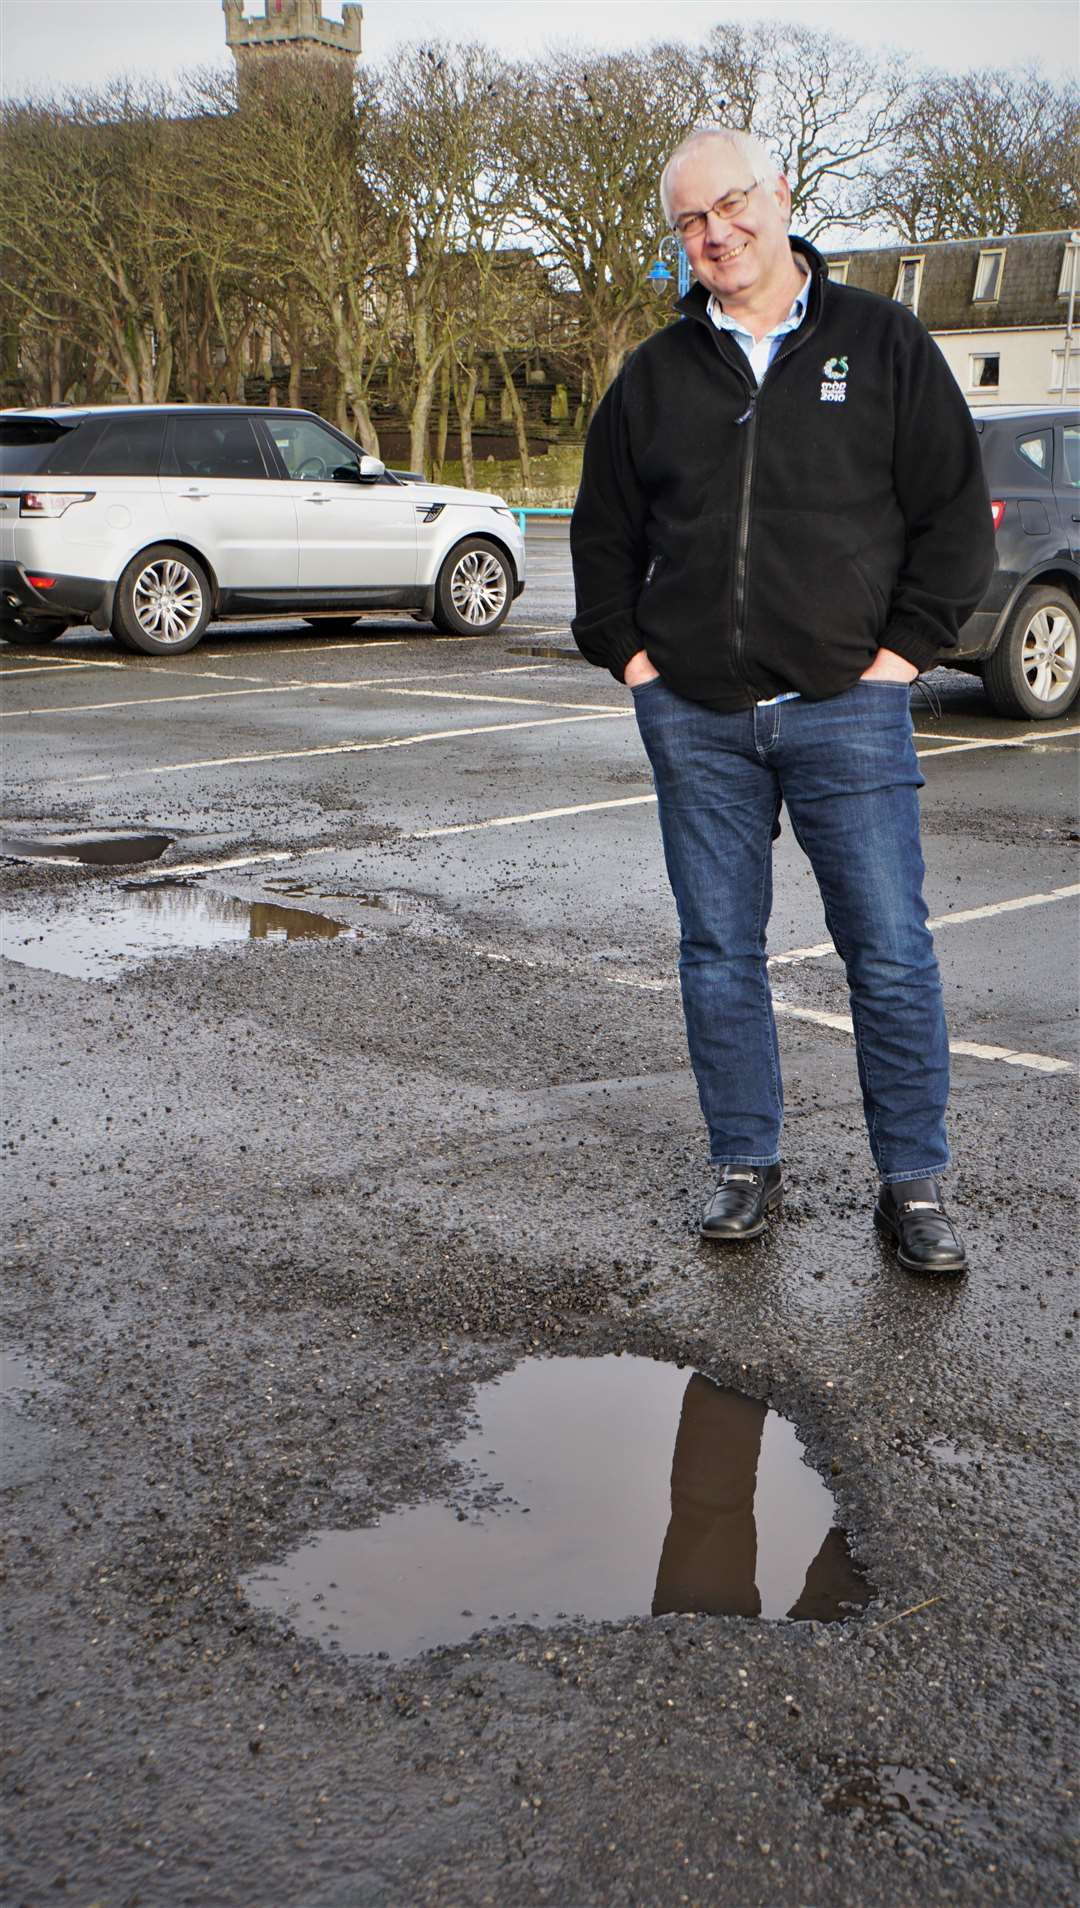 Councillor Raymond Bremner pictured in 2019 beside a heart-shaped pothole in Wick riverside car park that has since been fixed. Picture: DGS